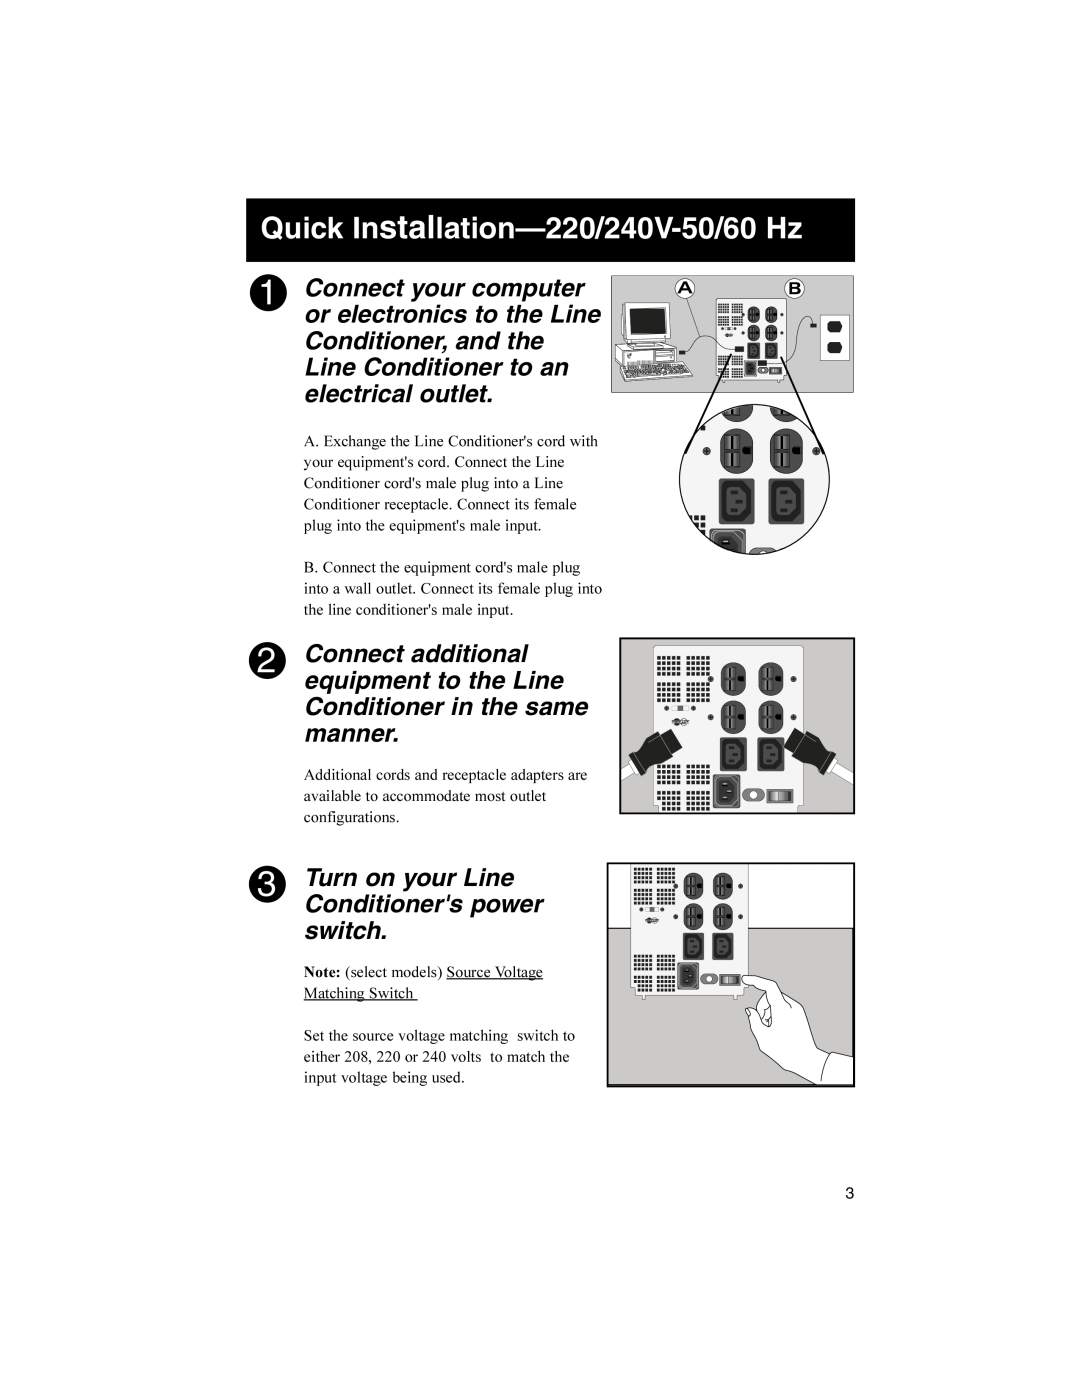 Tripp Lite 93-2268_EN owner manual Quick Installation-220/240V-50/60 Hz, Turn on your Line, switch, Conditioners power 